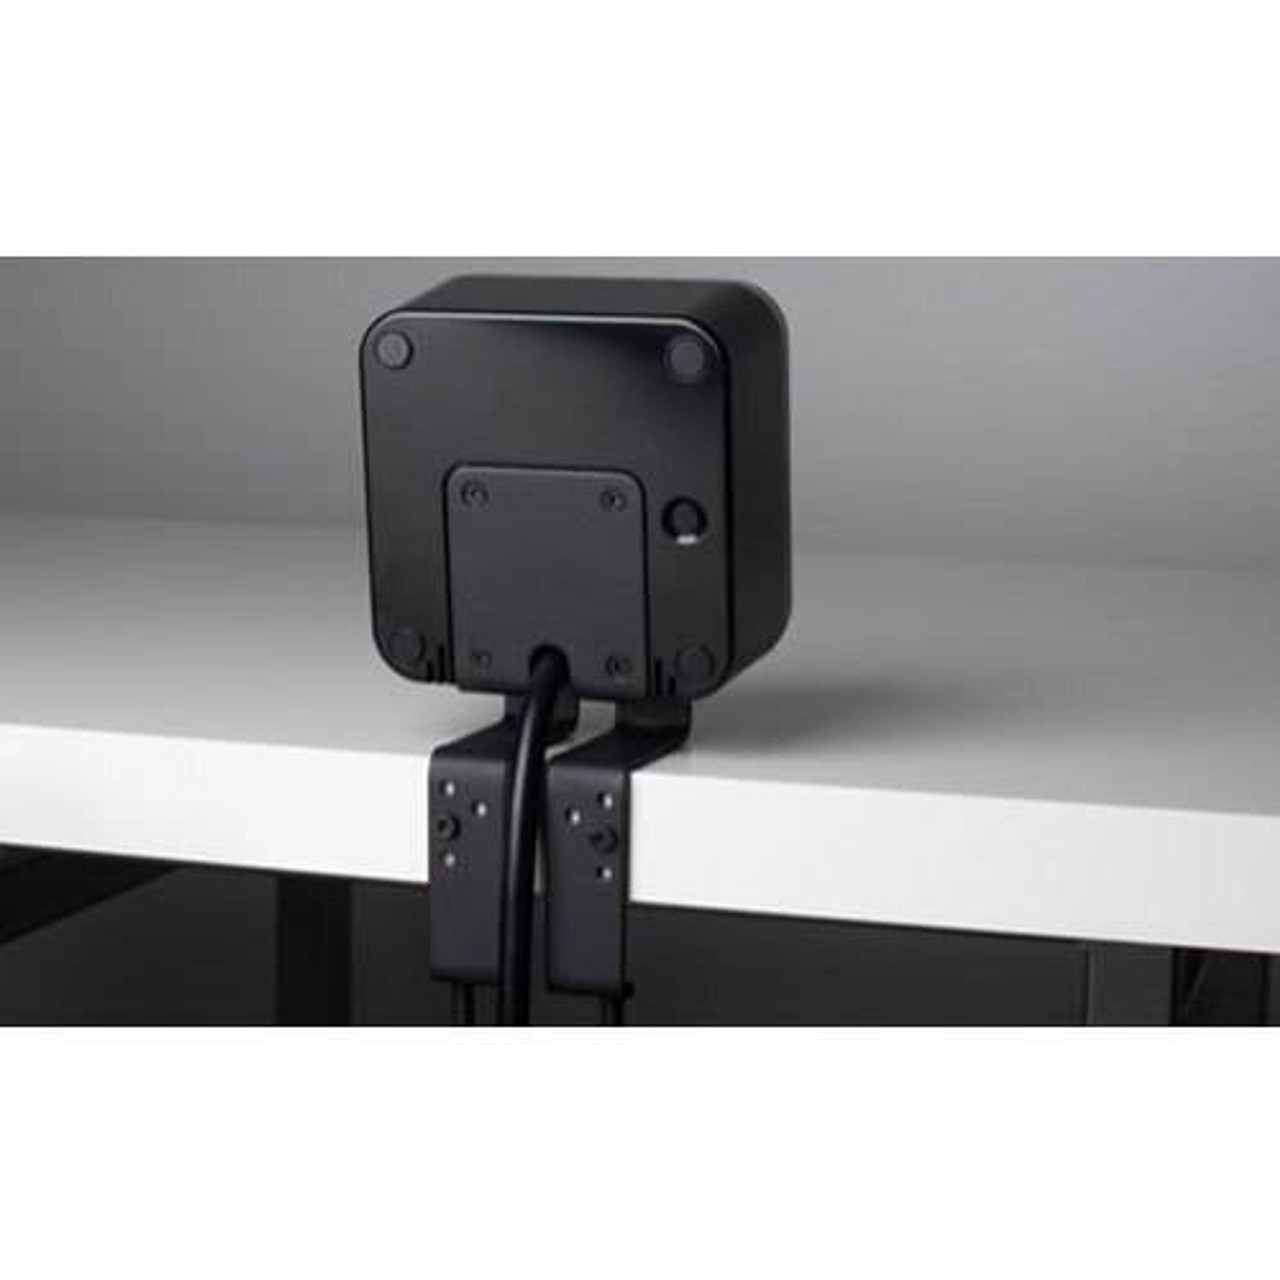 Brandstand BRANDSTAND CUBIE 3 OUTLETS 4 USB CHARGING PORTS W/ PASS THROUGH PLUG